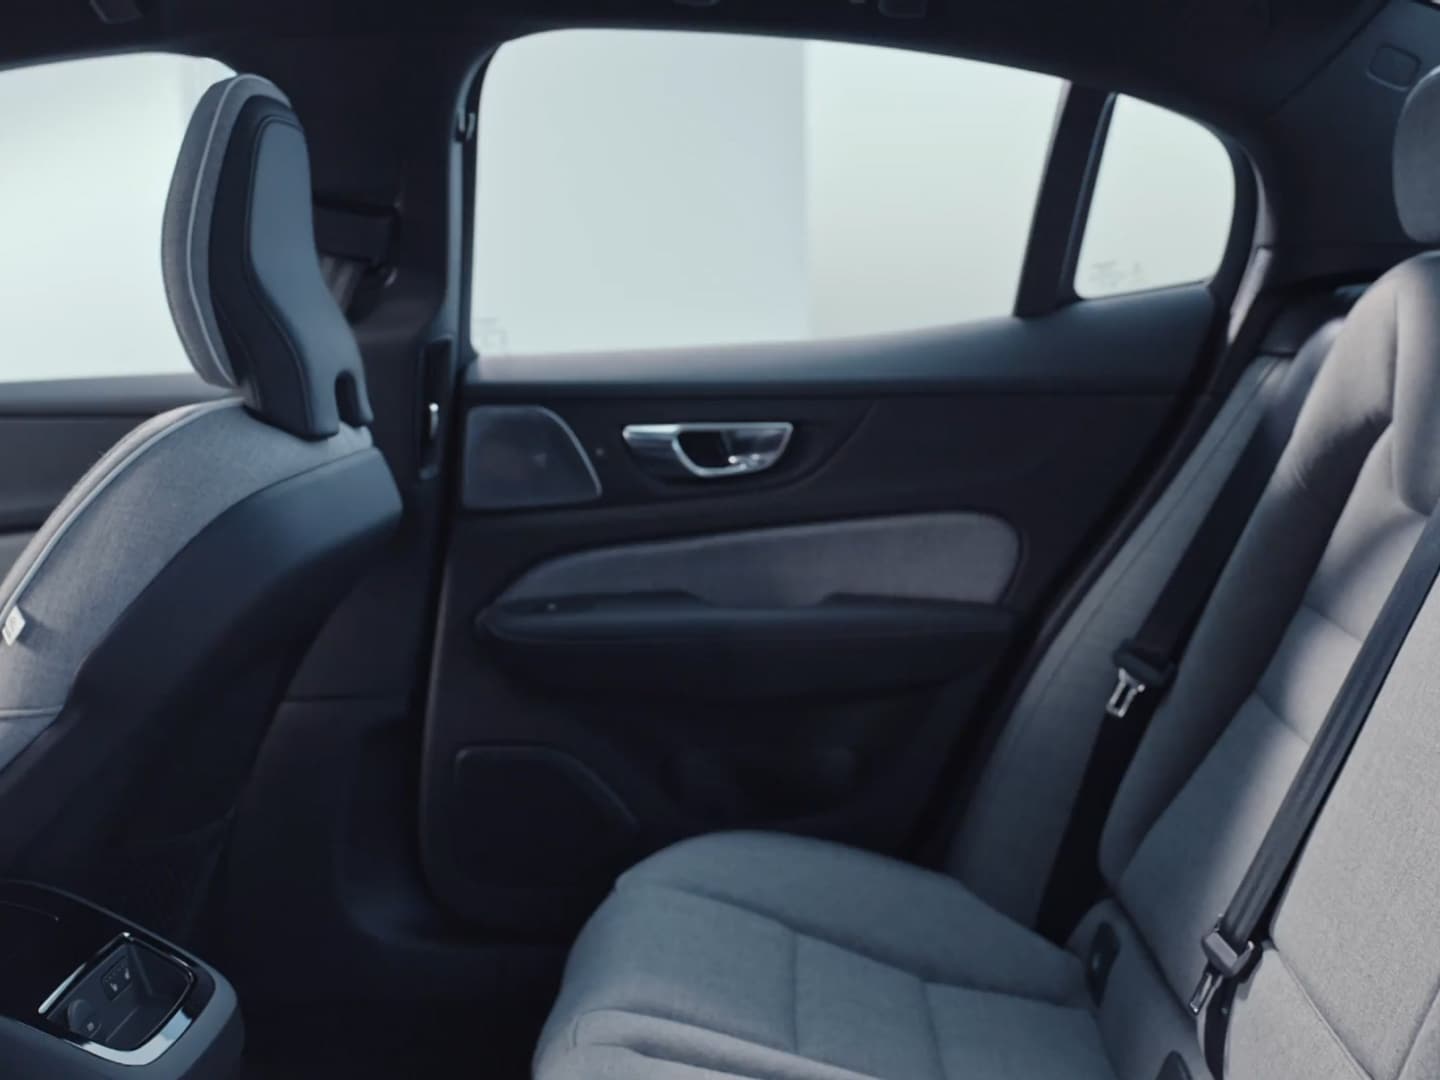 The Volvo S60 Recharge plug-in hybrid’s textile upholstered split-folding back passenger seats and rear center console.